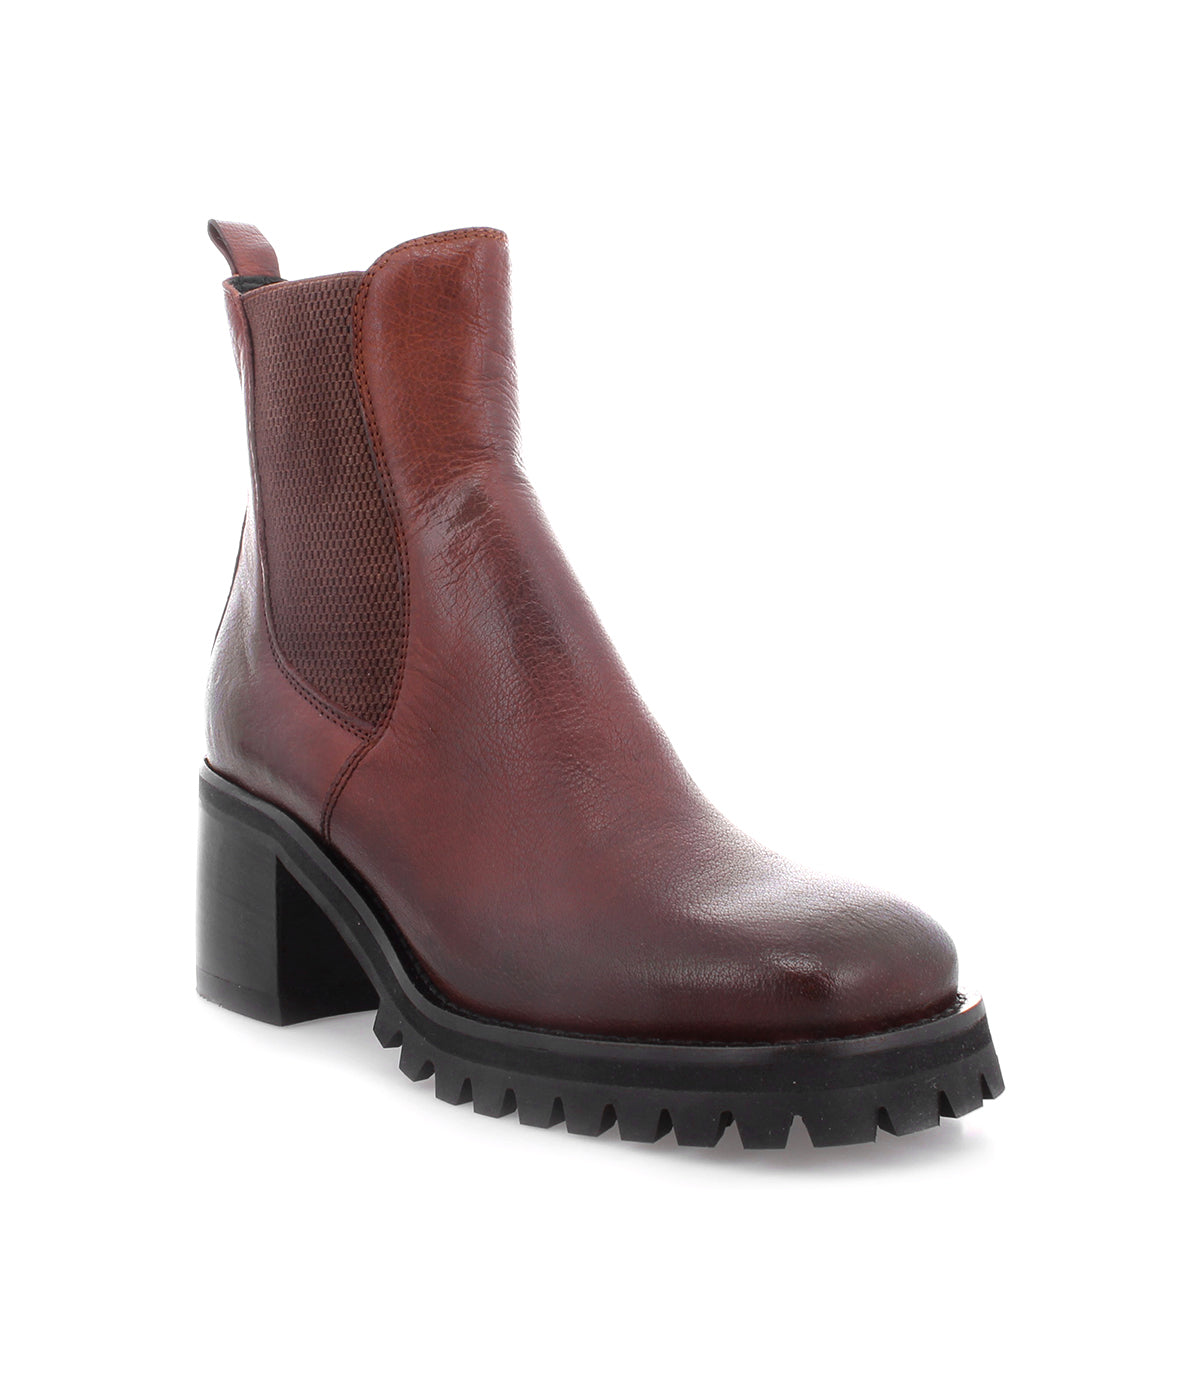 A women's Surge ankle boot in burgundy Italian leather by Bed Stu.